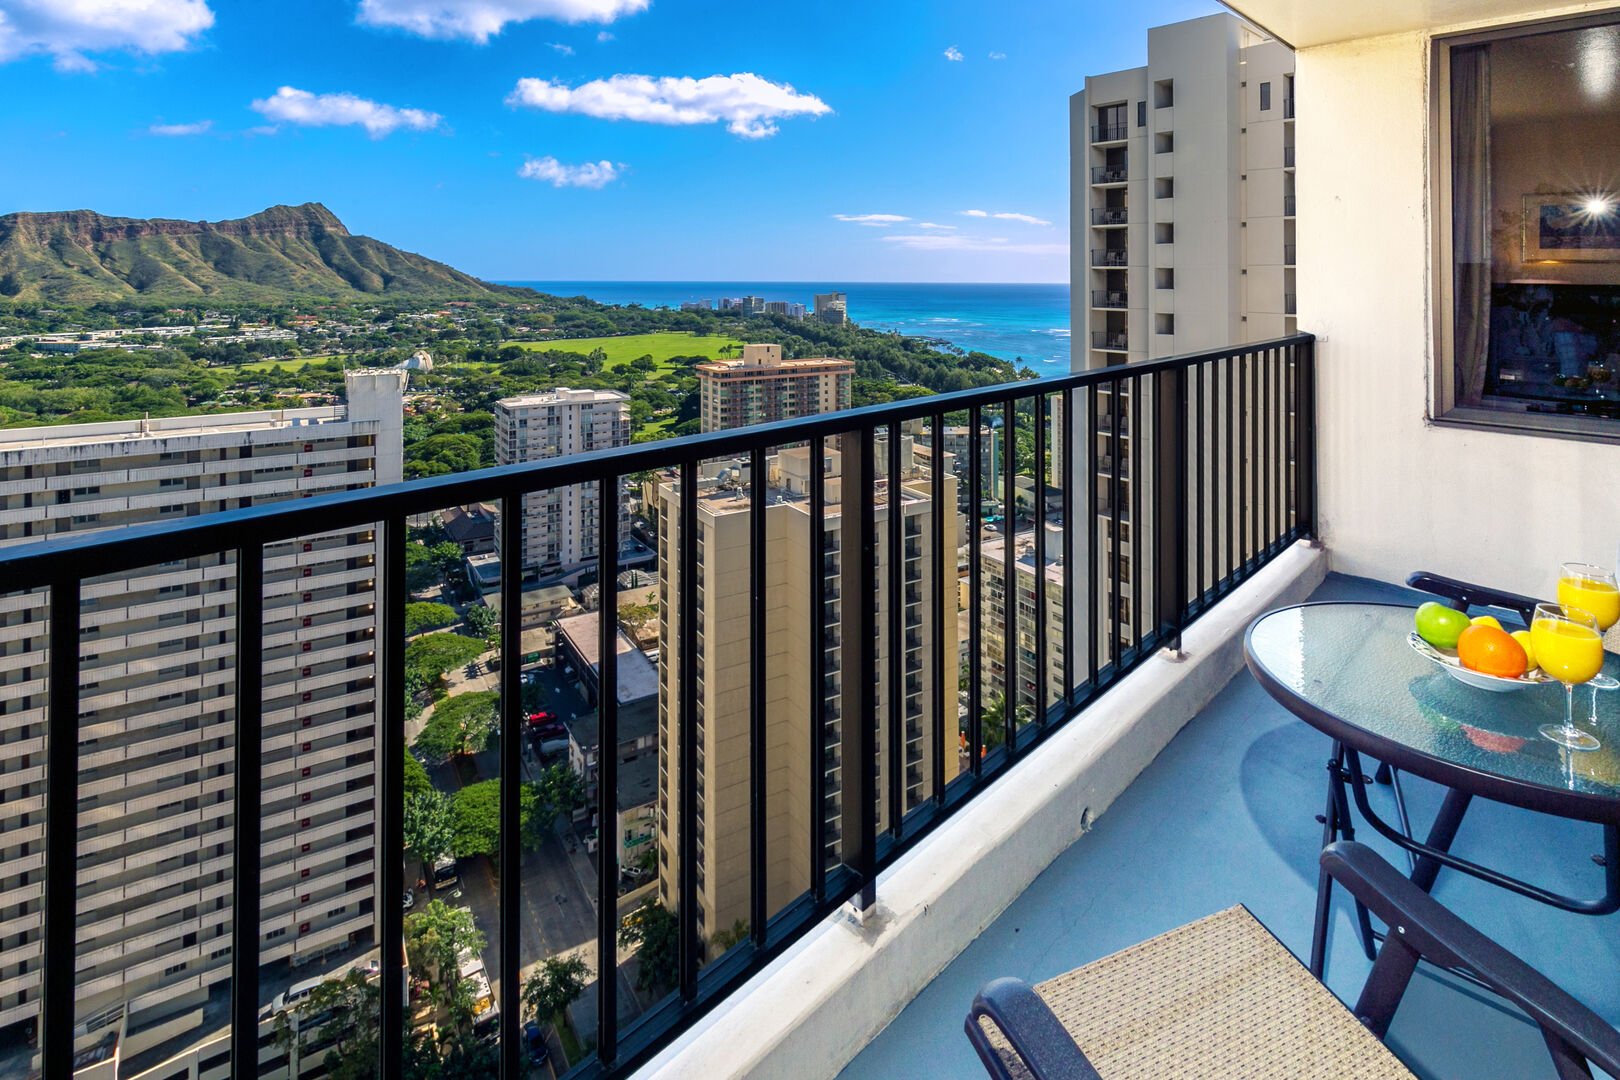 Enjoy your morning coffee on the balcony while looking at the breathtaking Ocean and Diamond Head views!